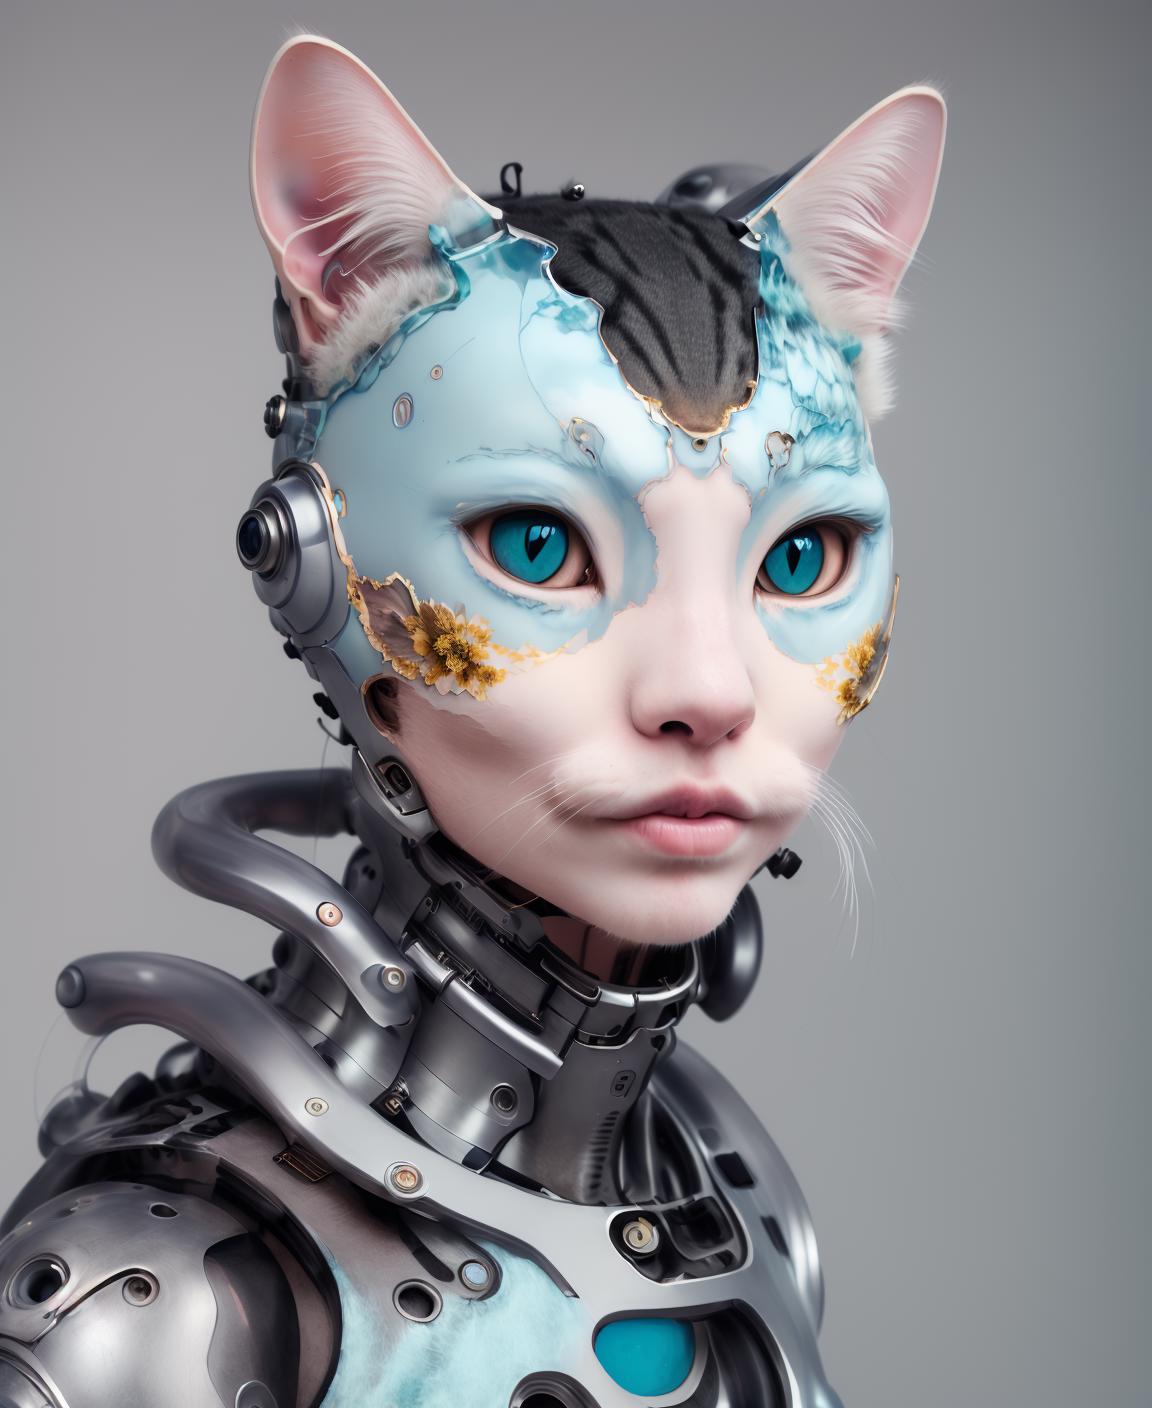 AI model image by CouloirGang